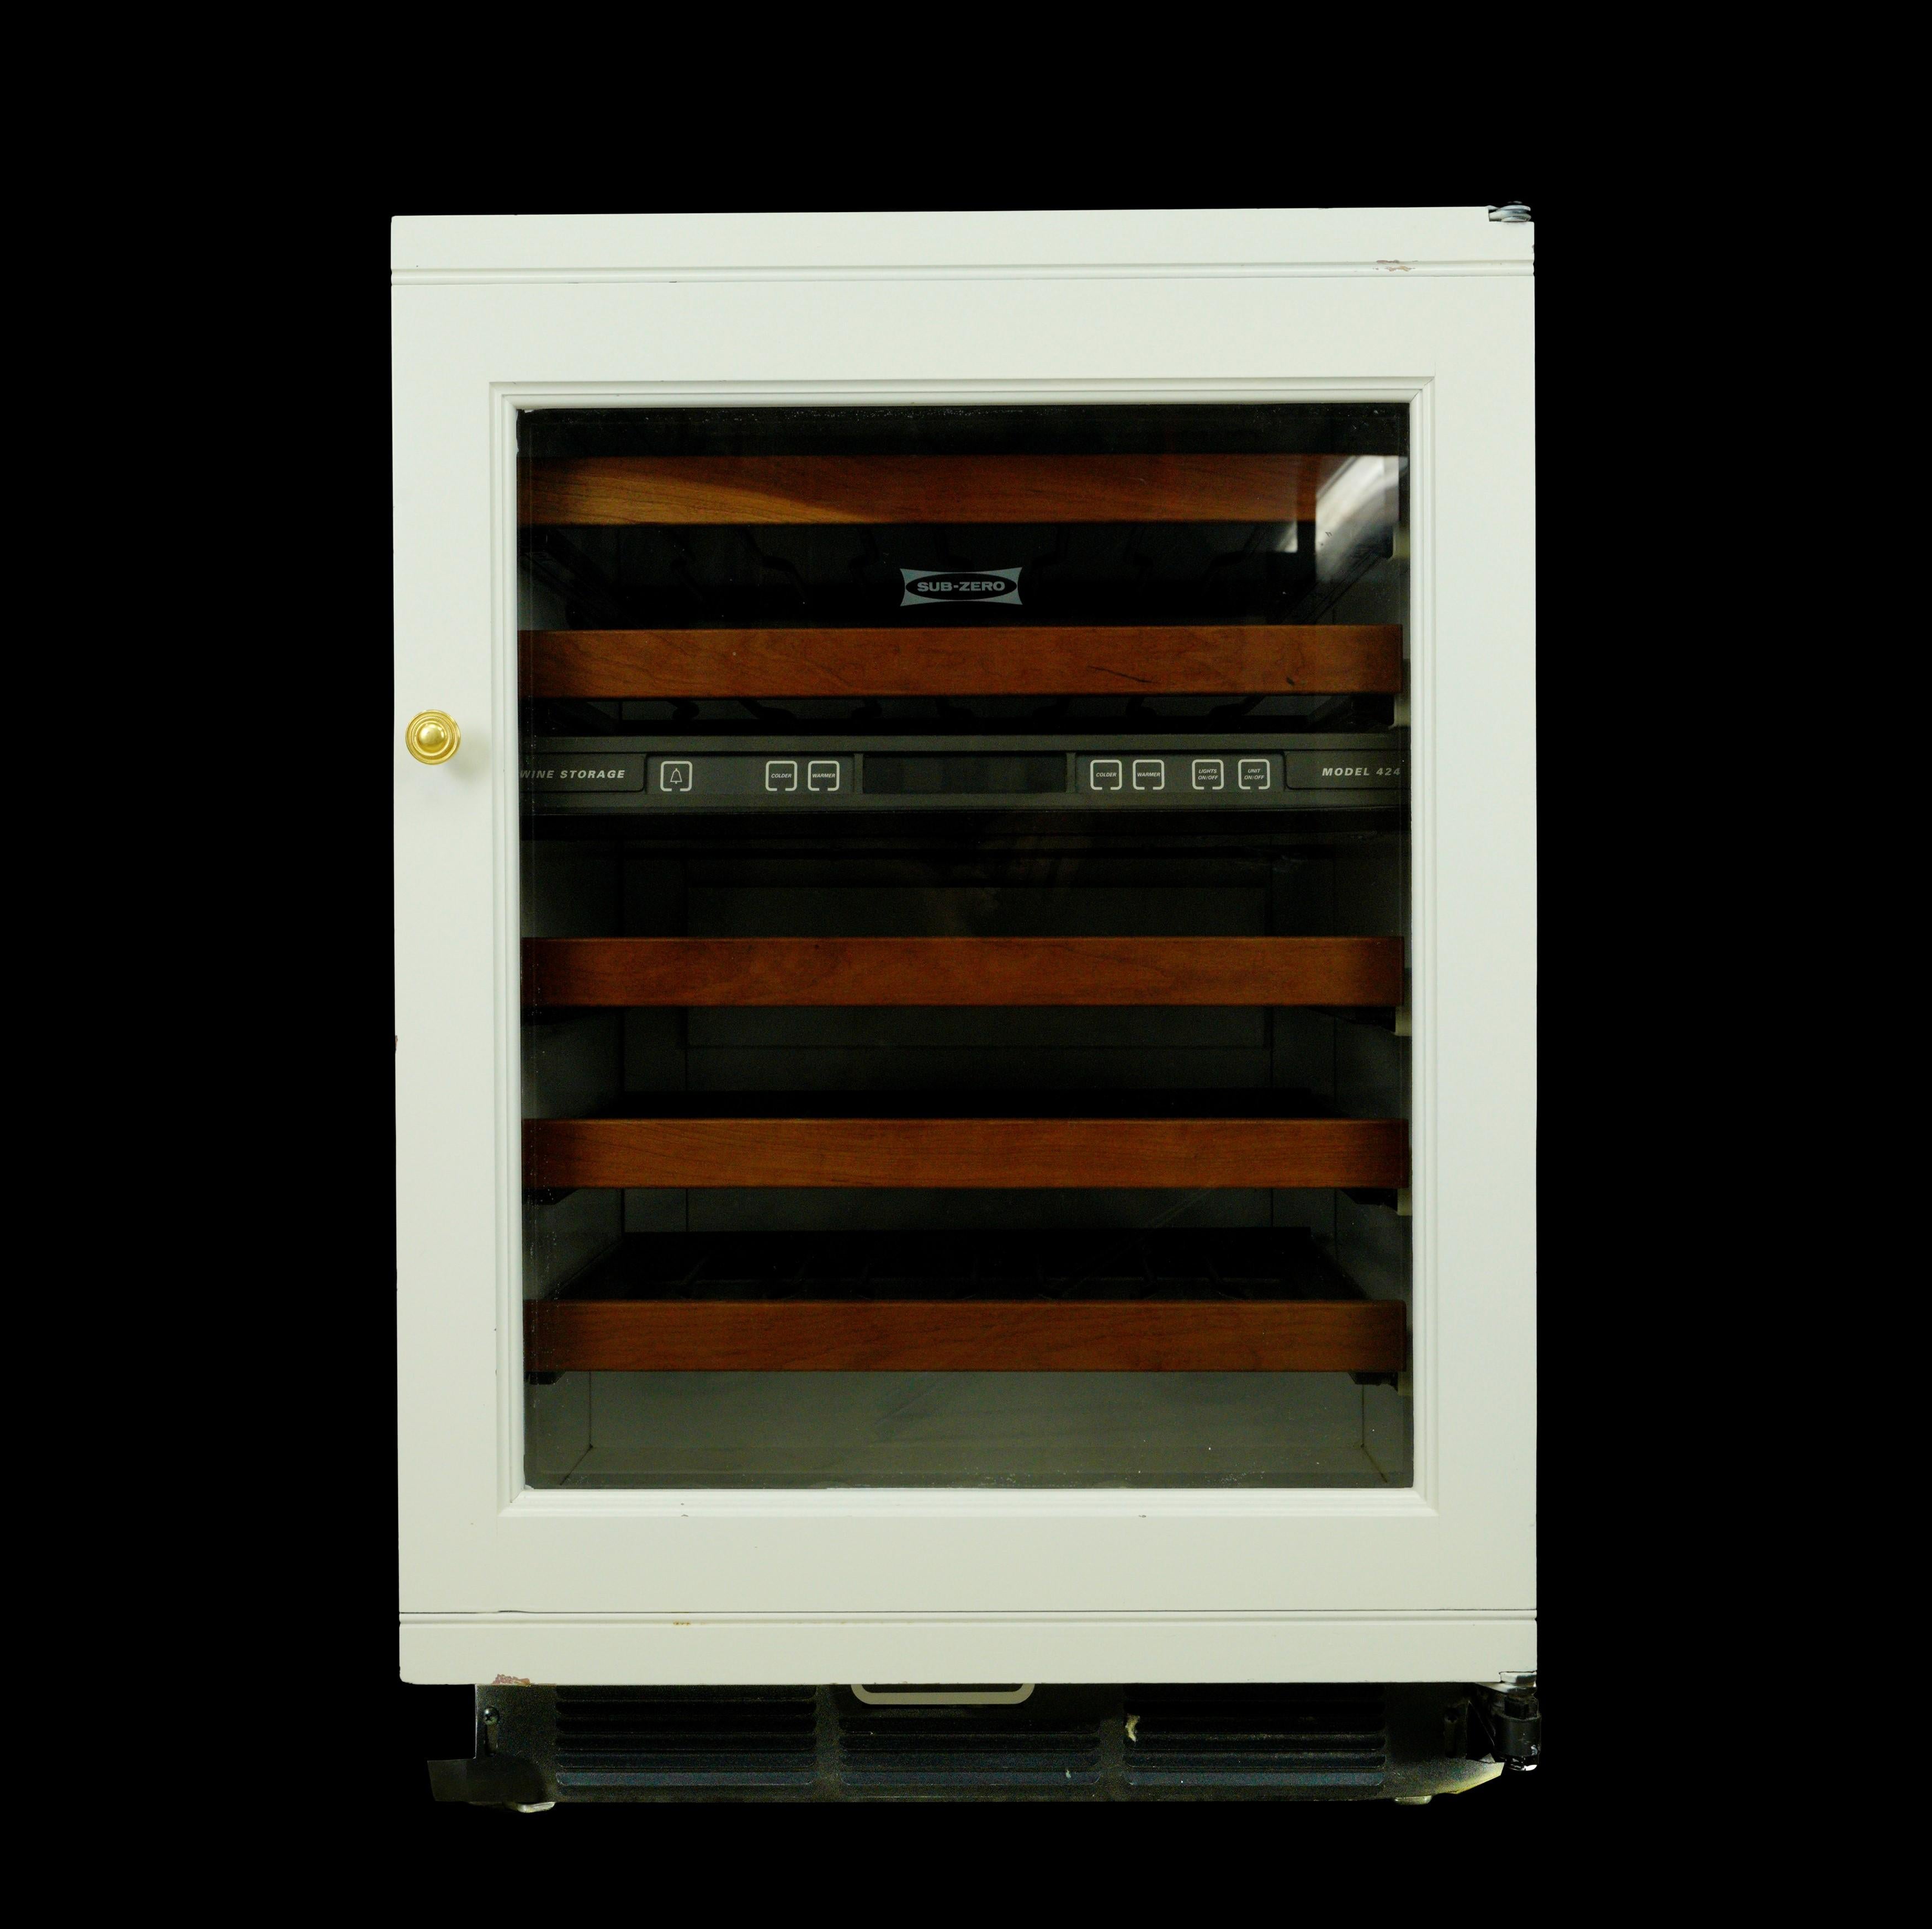 With a 46-bottle capacity and dual-zone functionality, this previously owned wine chiller provides the perfect environment for your wine collection.
Featuring roller-glide shelves with cherry wood facing and a glass door, the chiller seamlessly